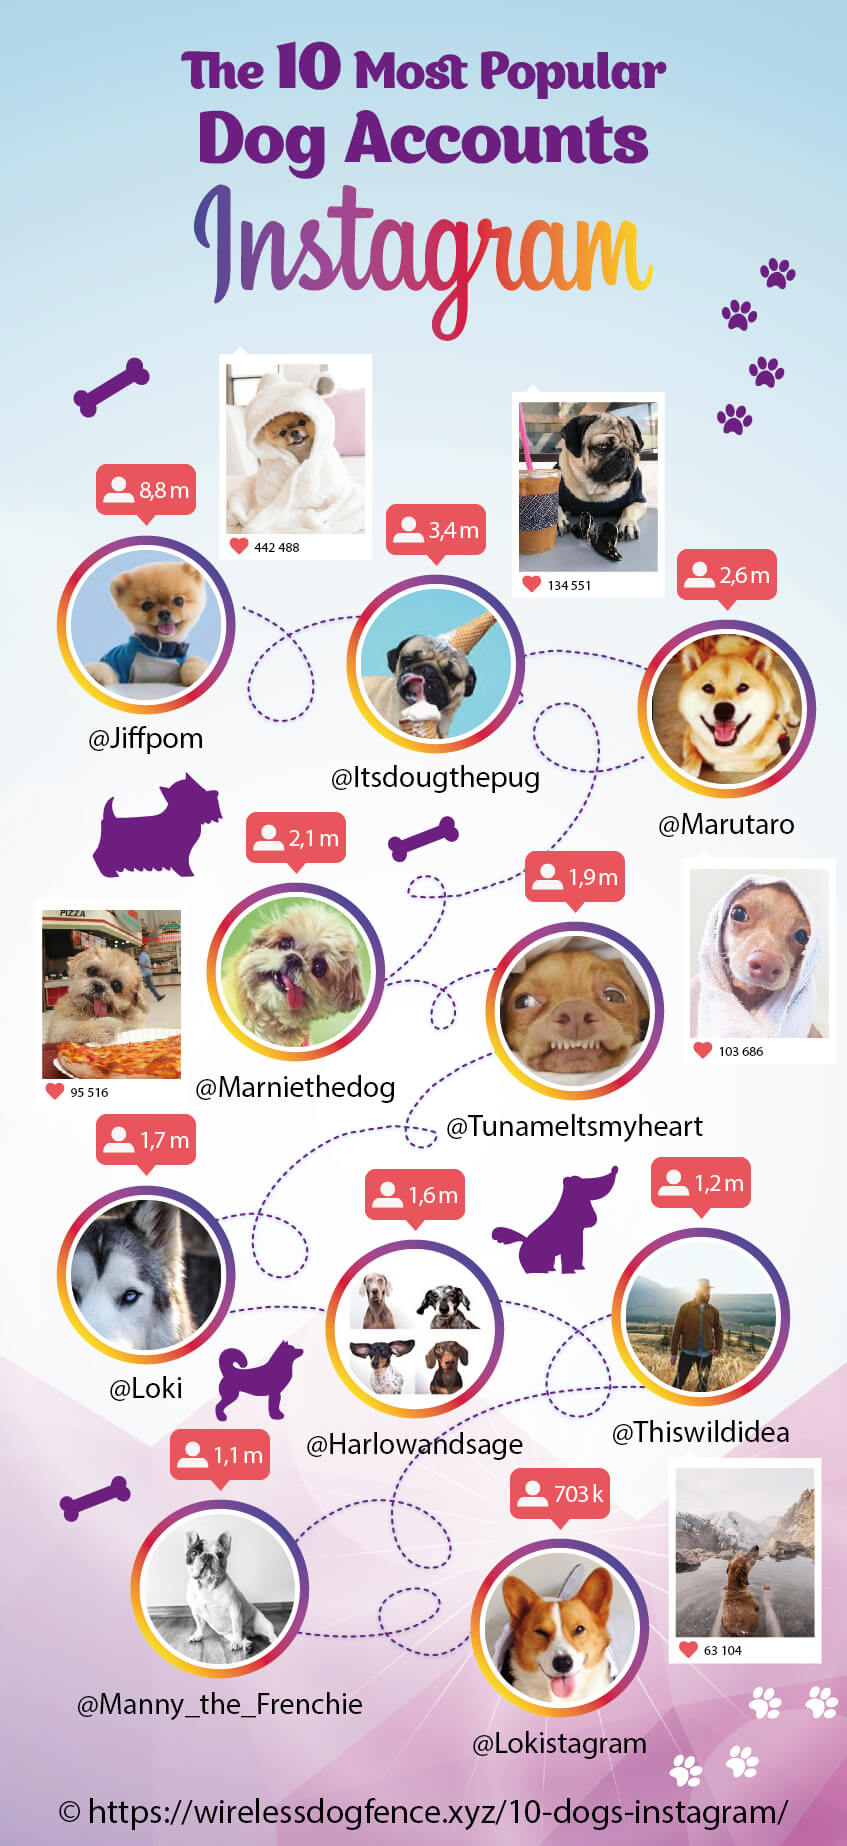 The-10-Most-Popular-Dog-Accounts-on-Instagram-Infographic-plaza